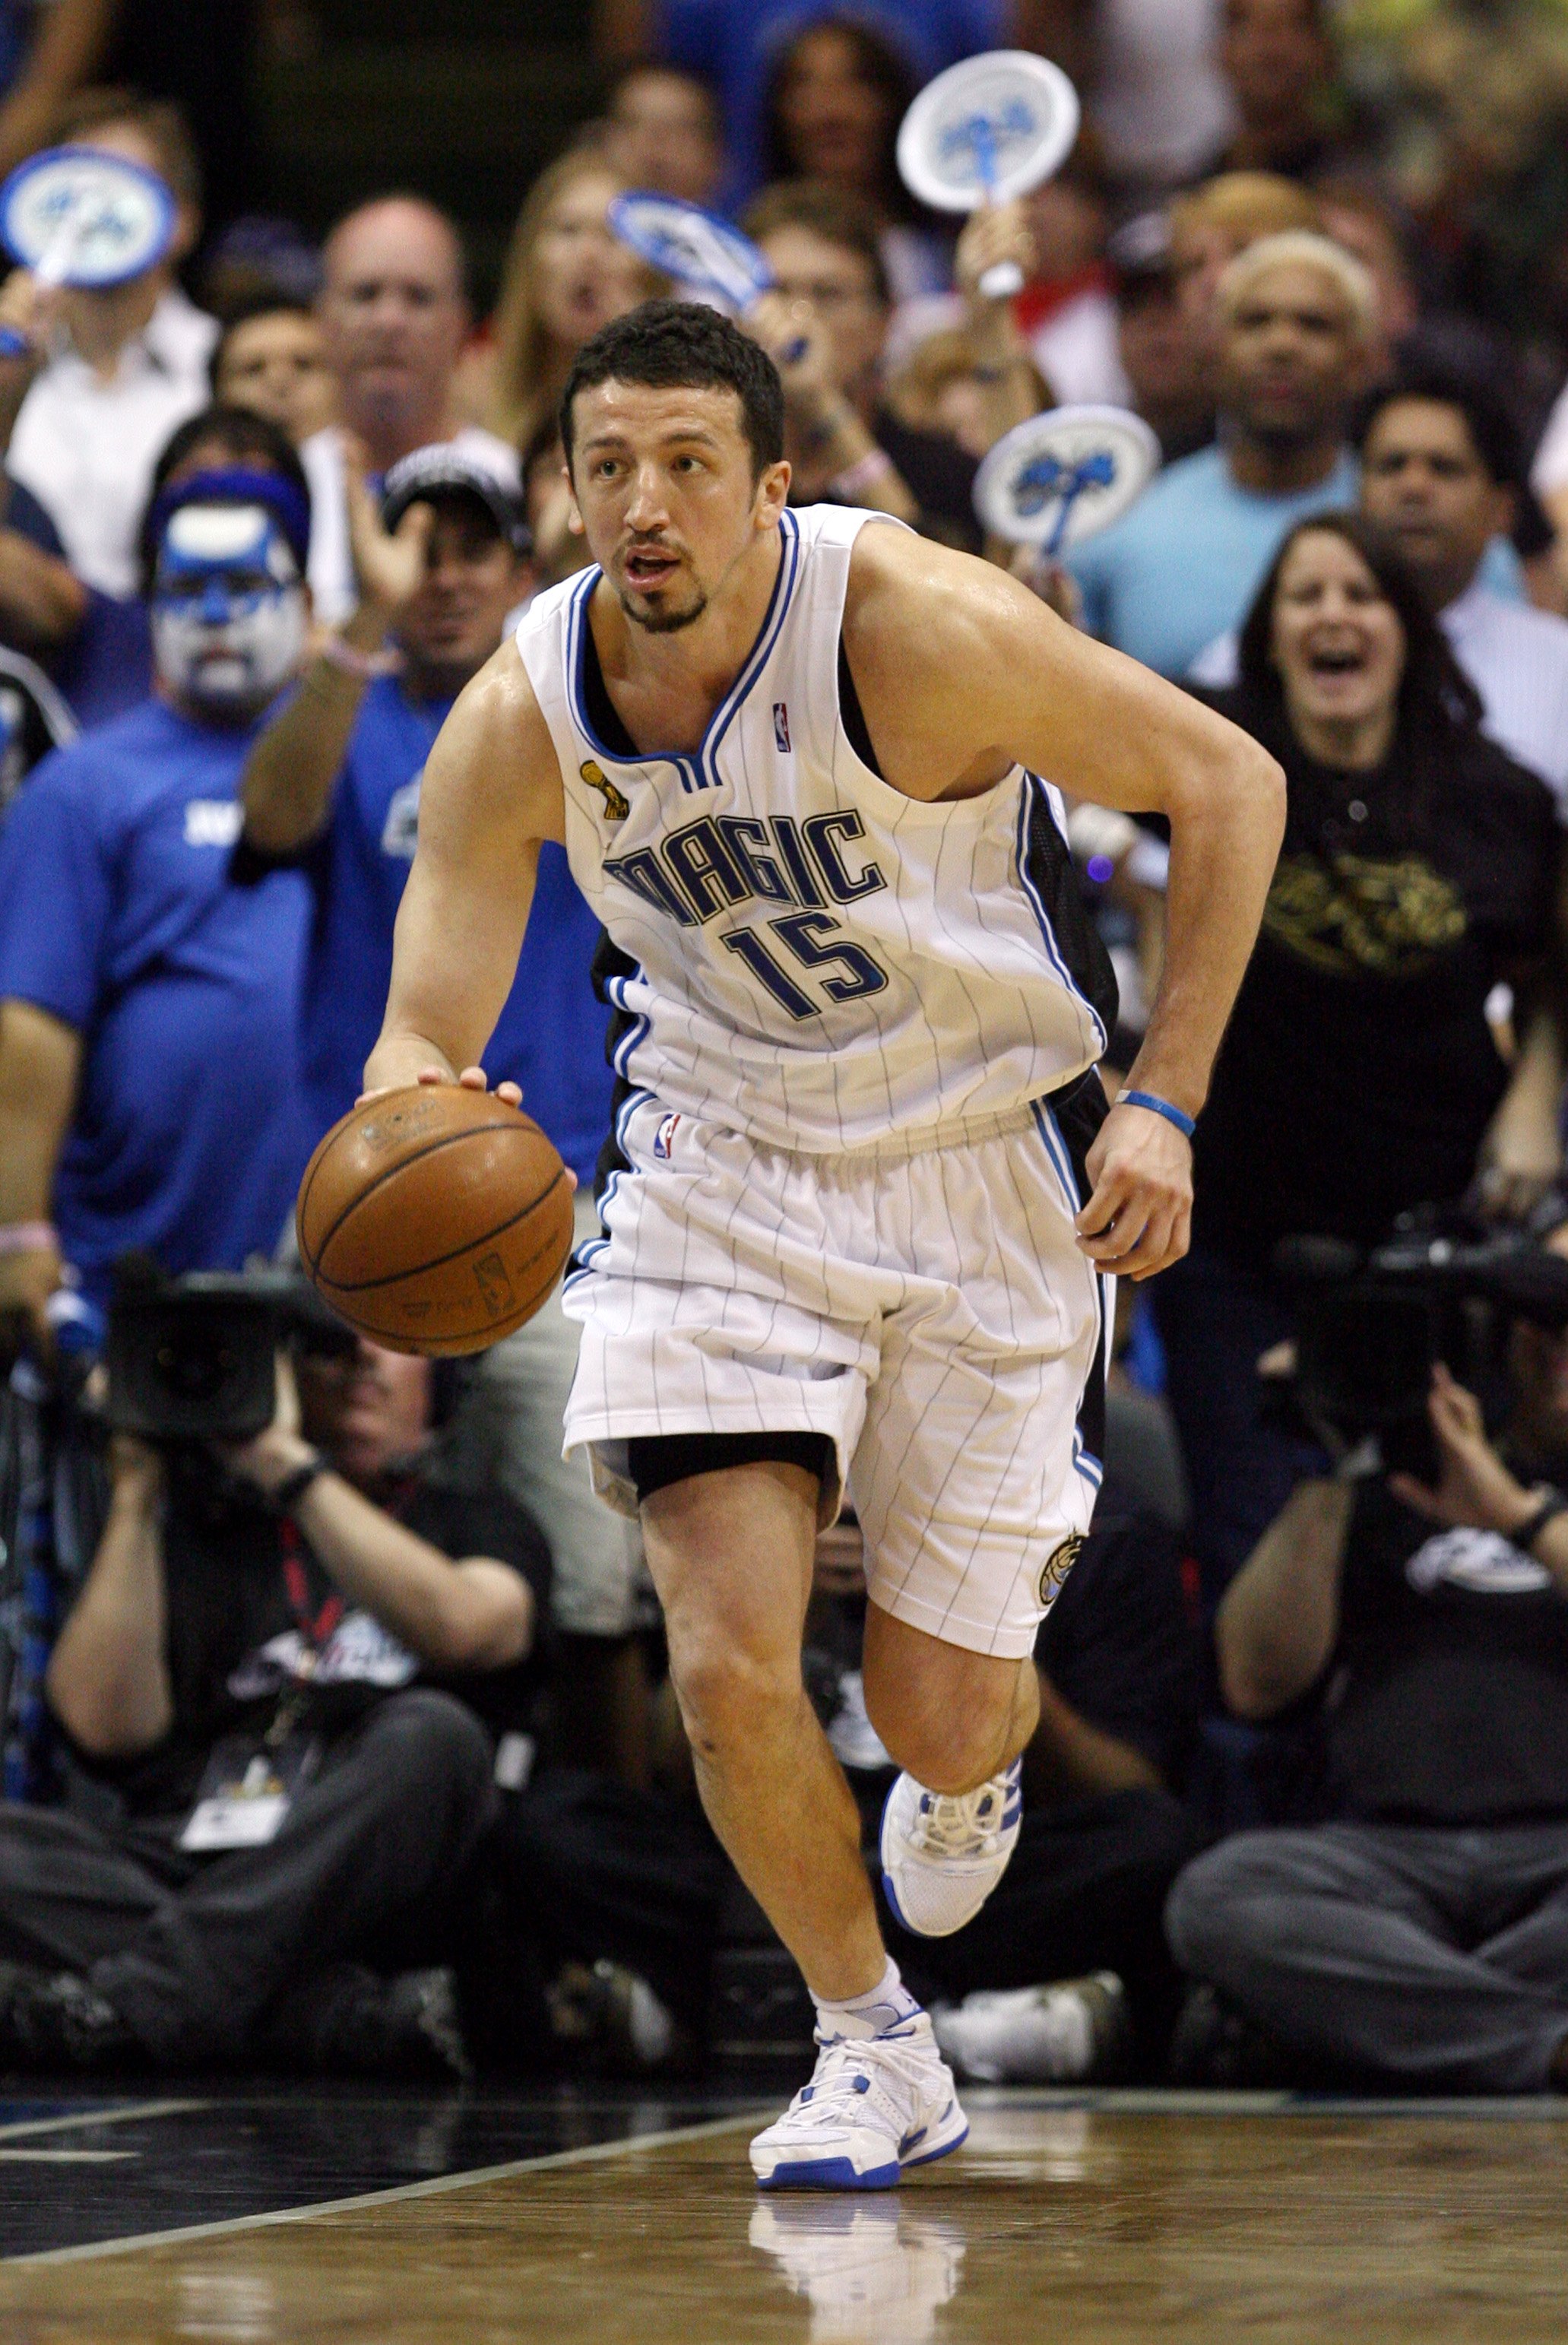 Goldstone's Top 30 players in Orlando Magic history: 1-10